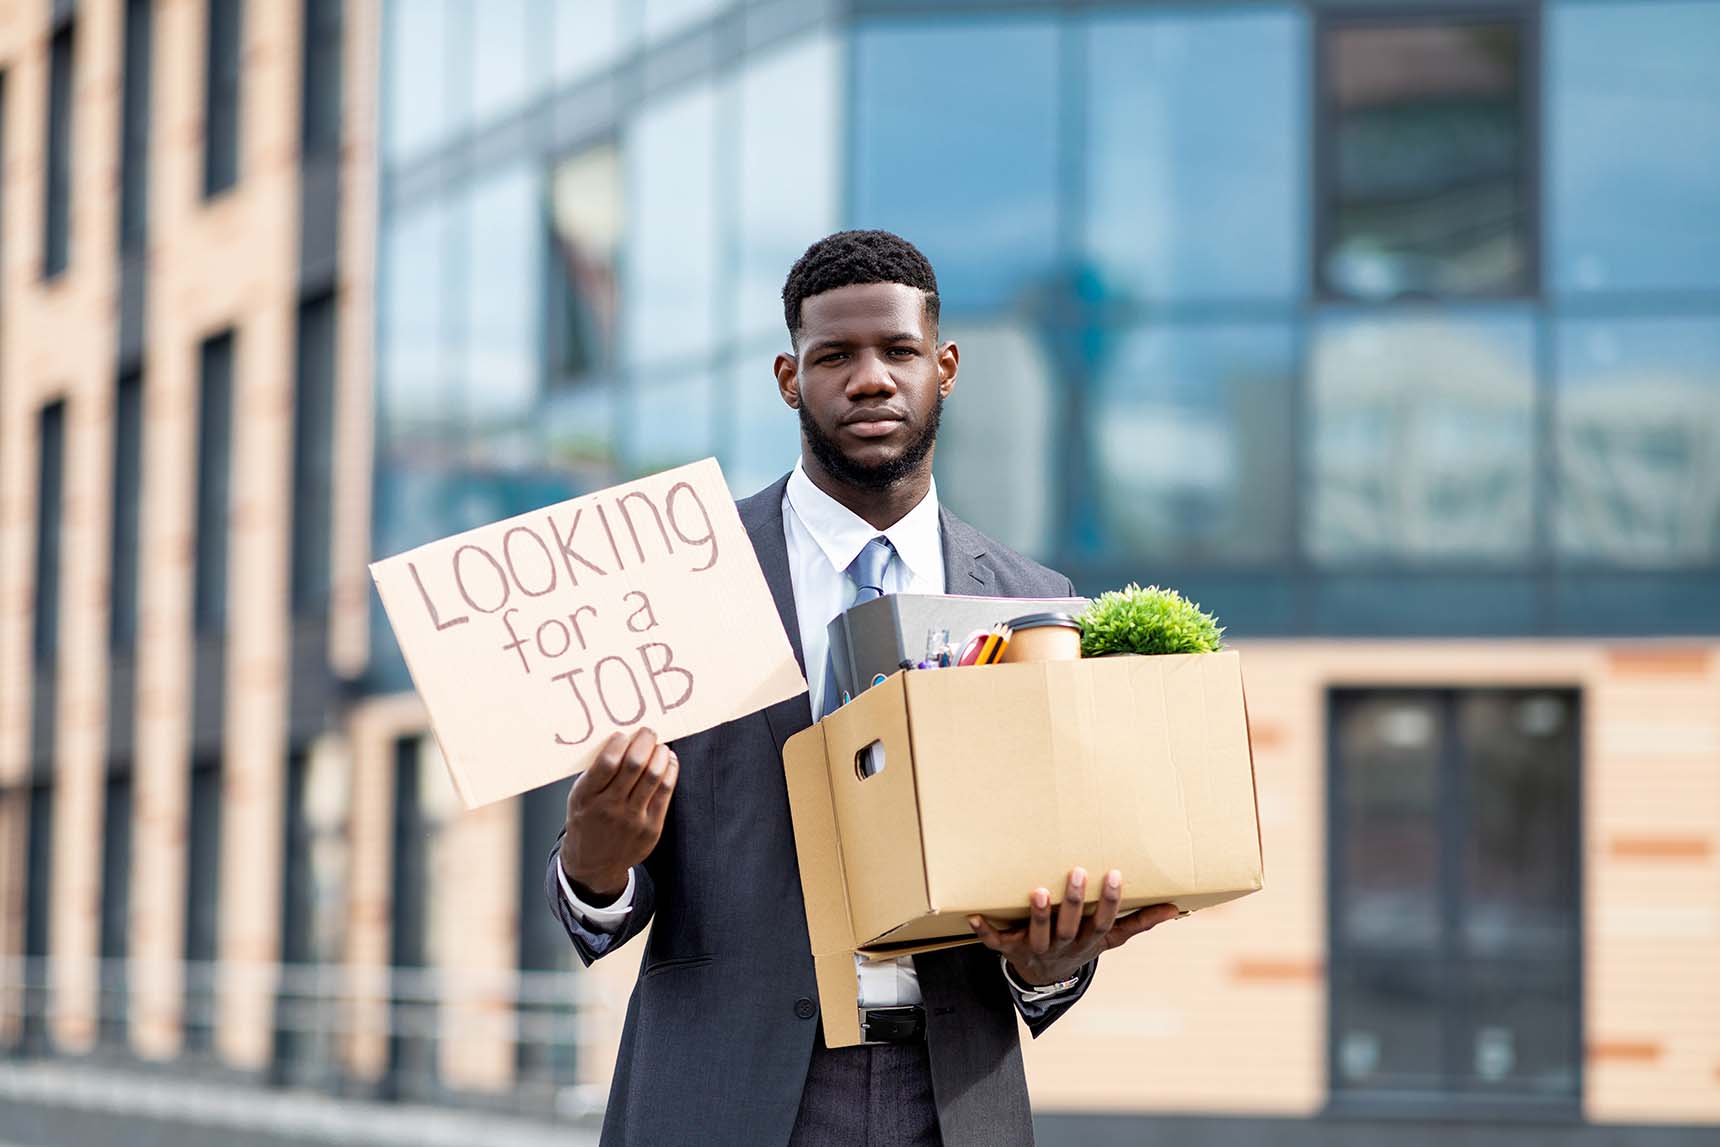 3 Job Search Tips When the Market Takes a Hard Turn